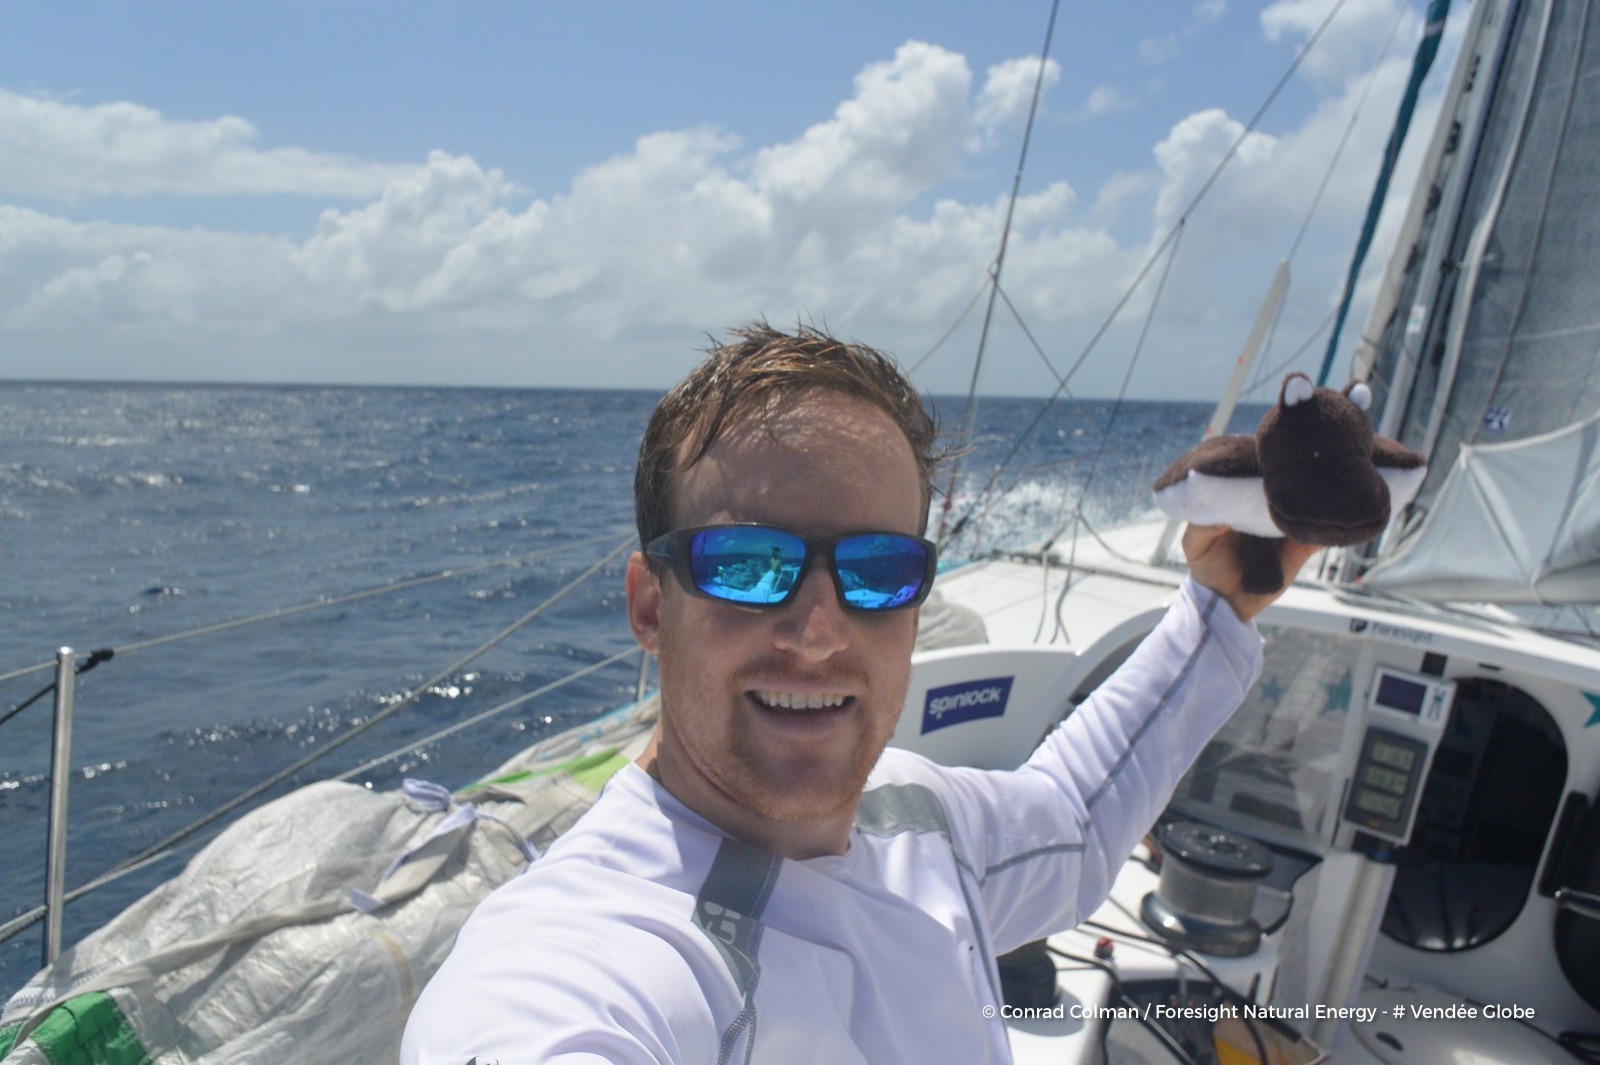 Conrad Coleman sailing around the world unassisted and without diesel fuel.